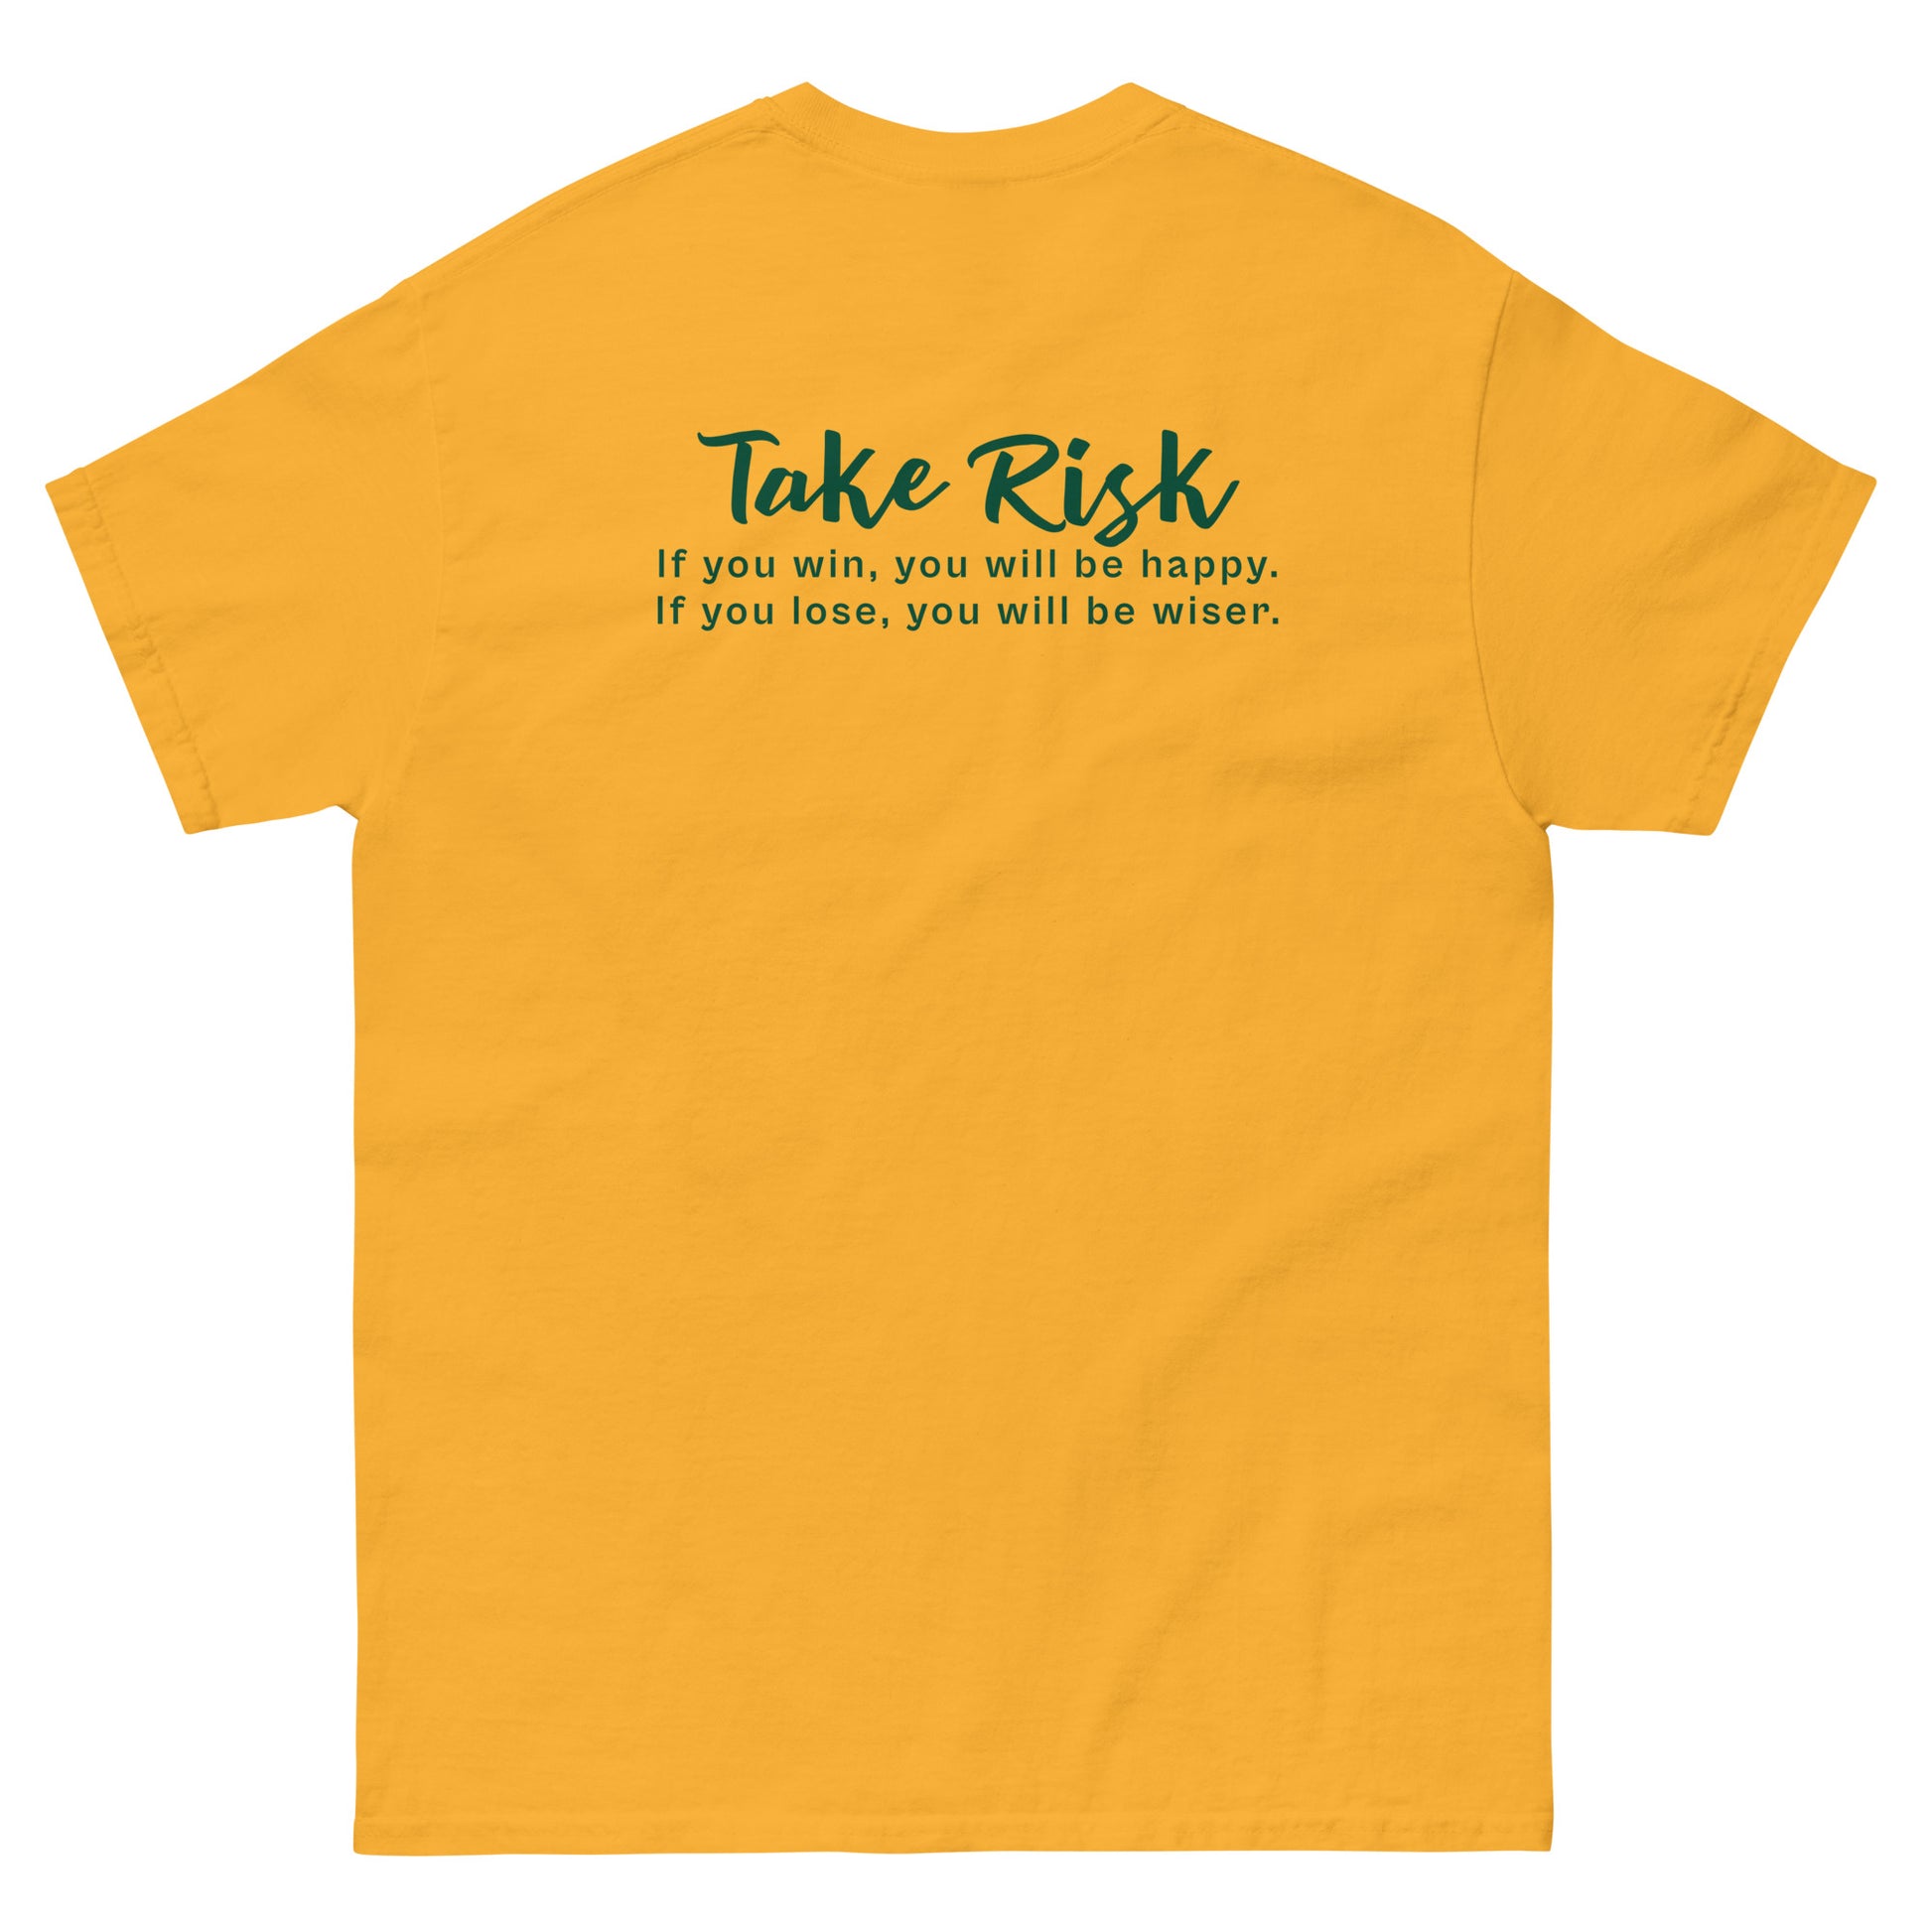 Yellow High Quality Tee - Front Design with "Take Risk, if you win you will be happy, if you lose you will be wiser." print and an UFO print on left chest - Back Design with a Phrase "Take Risk, if you win you will be happy, if you lose you will be wiser." print